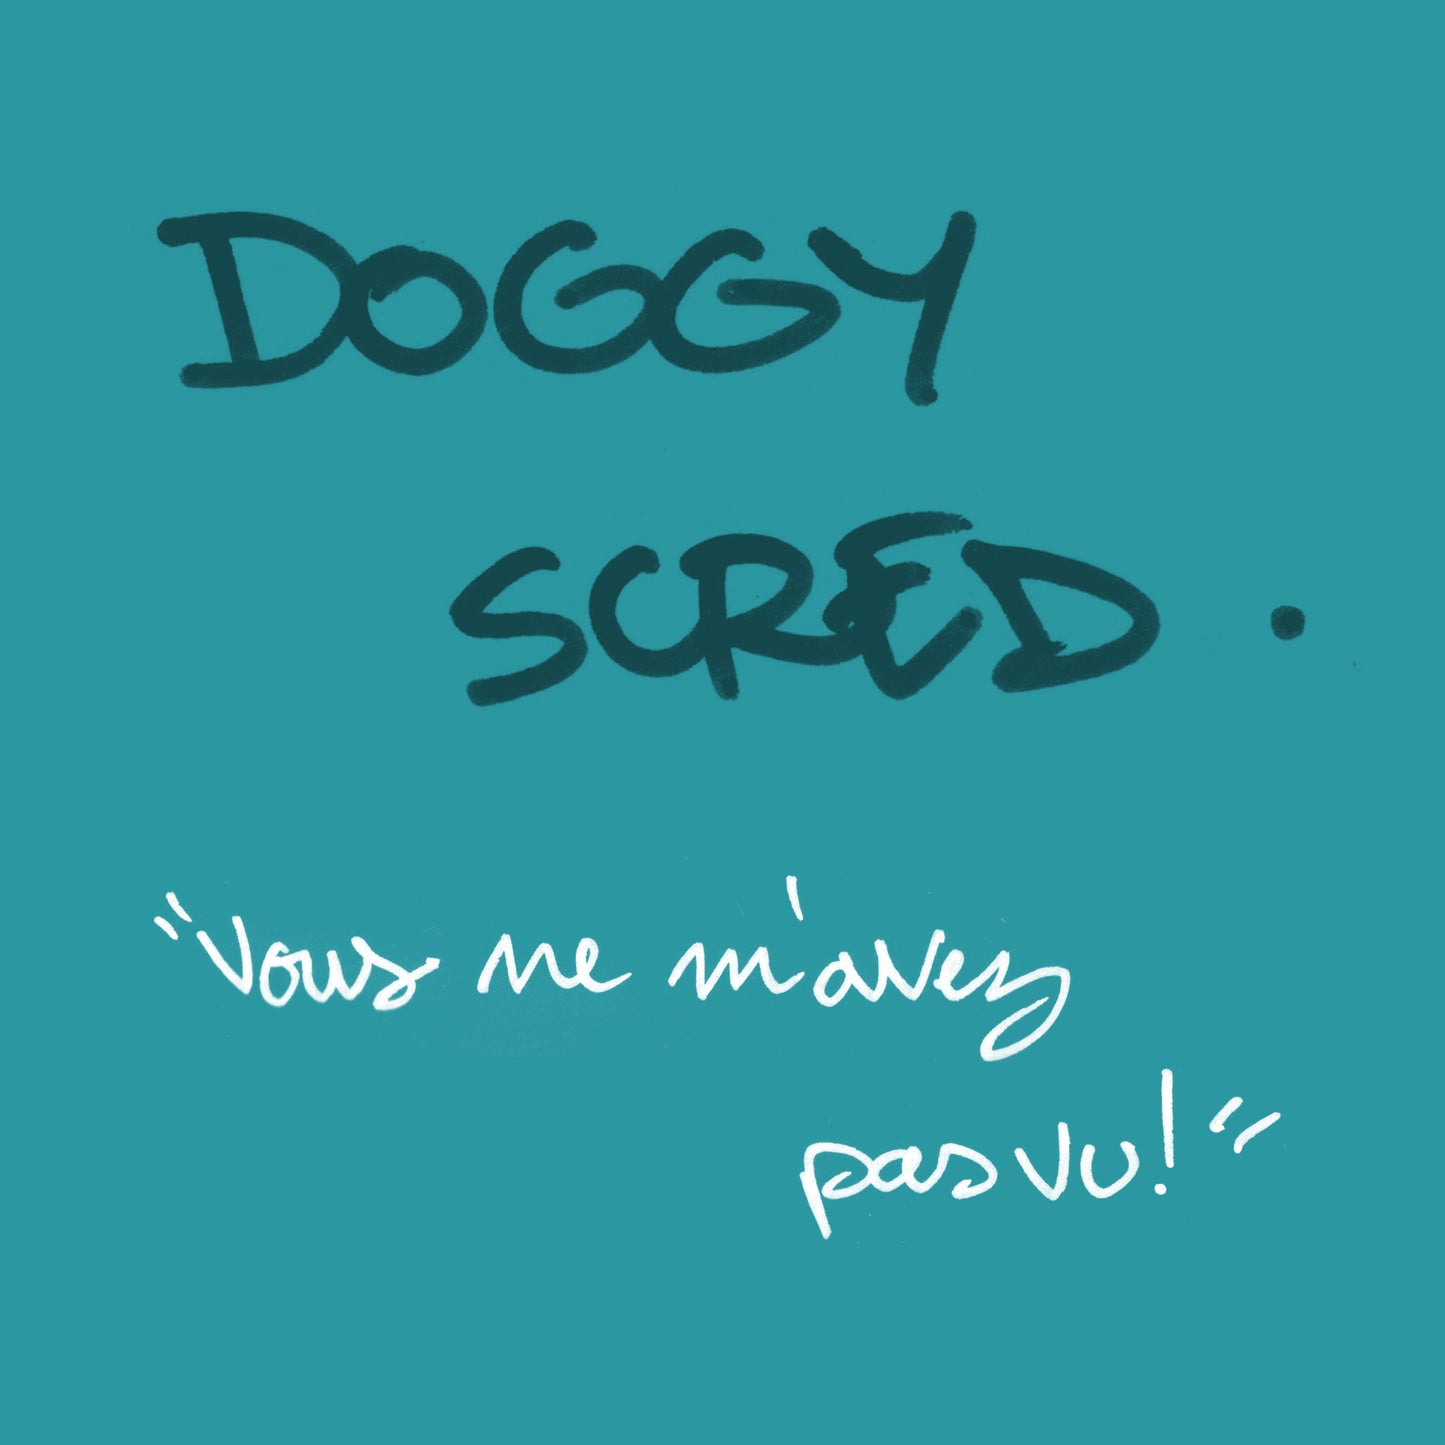 Doggy Scred